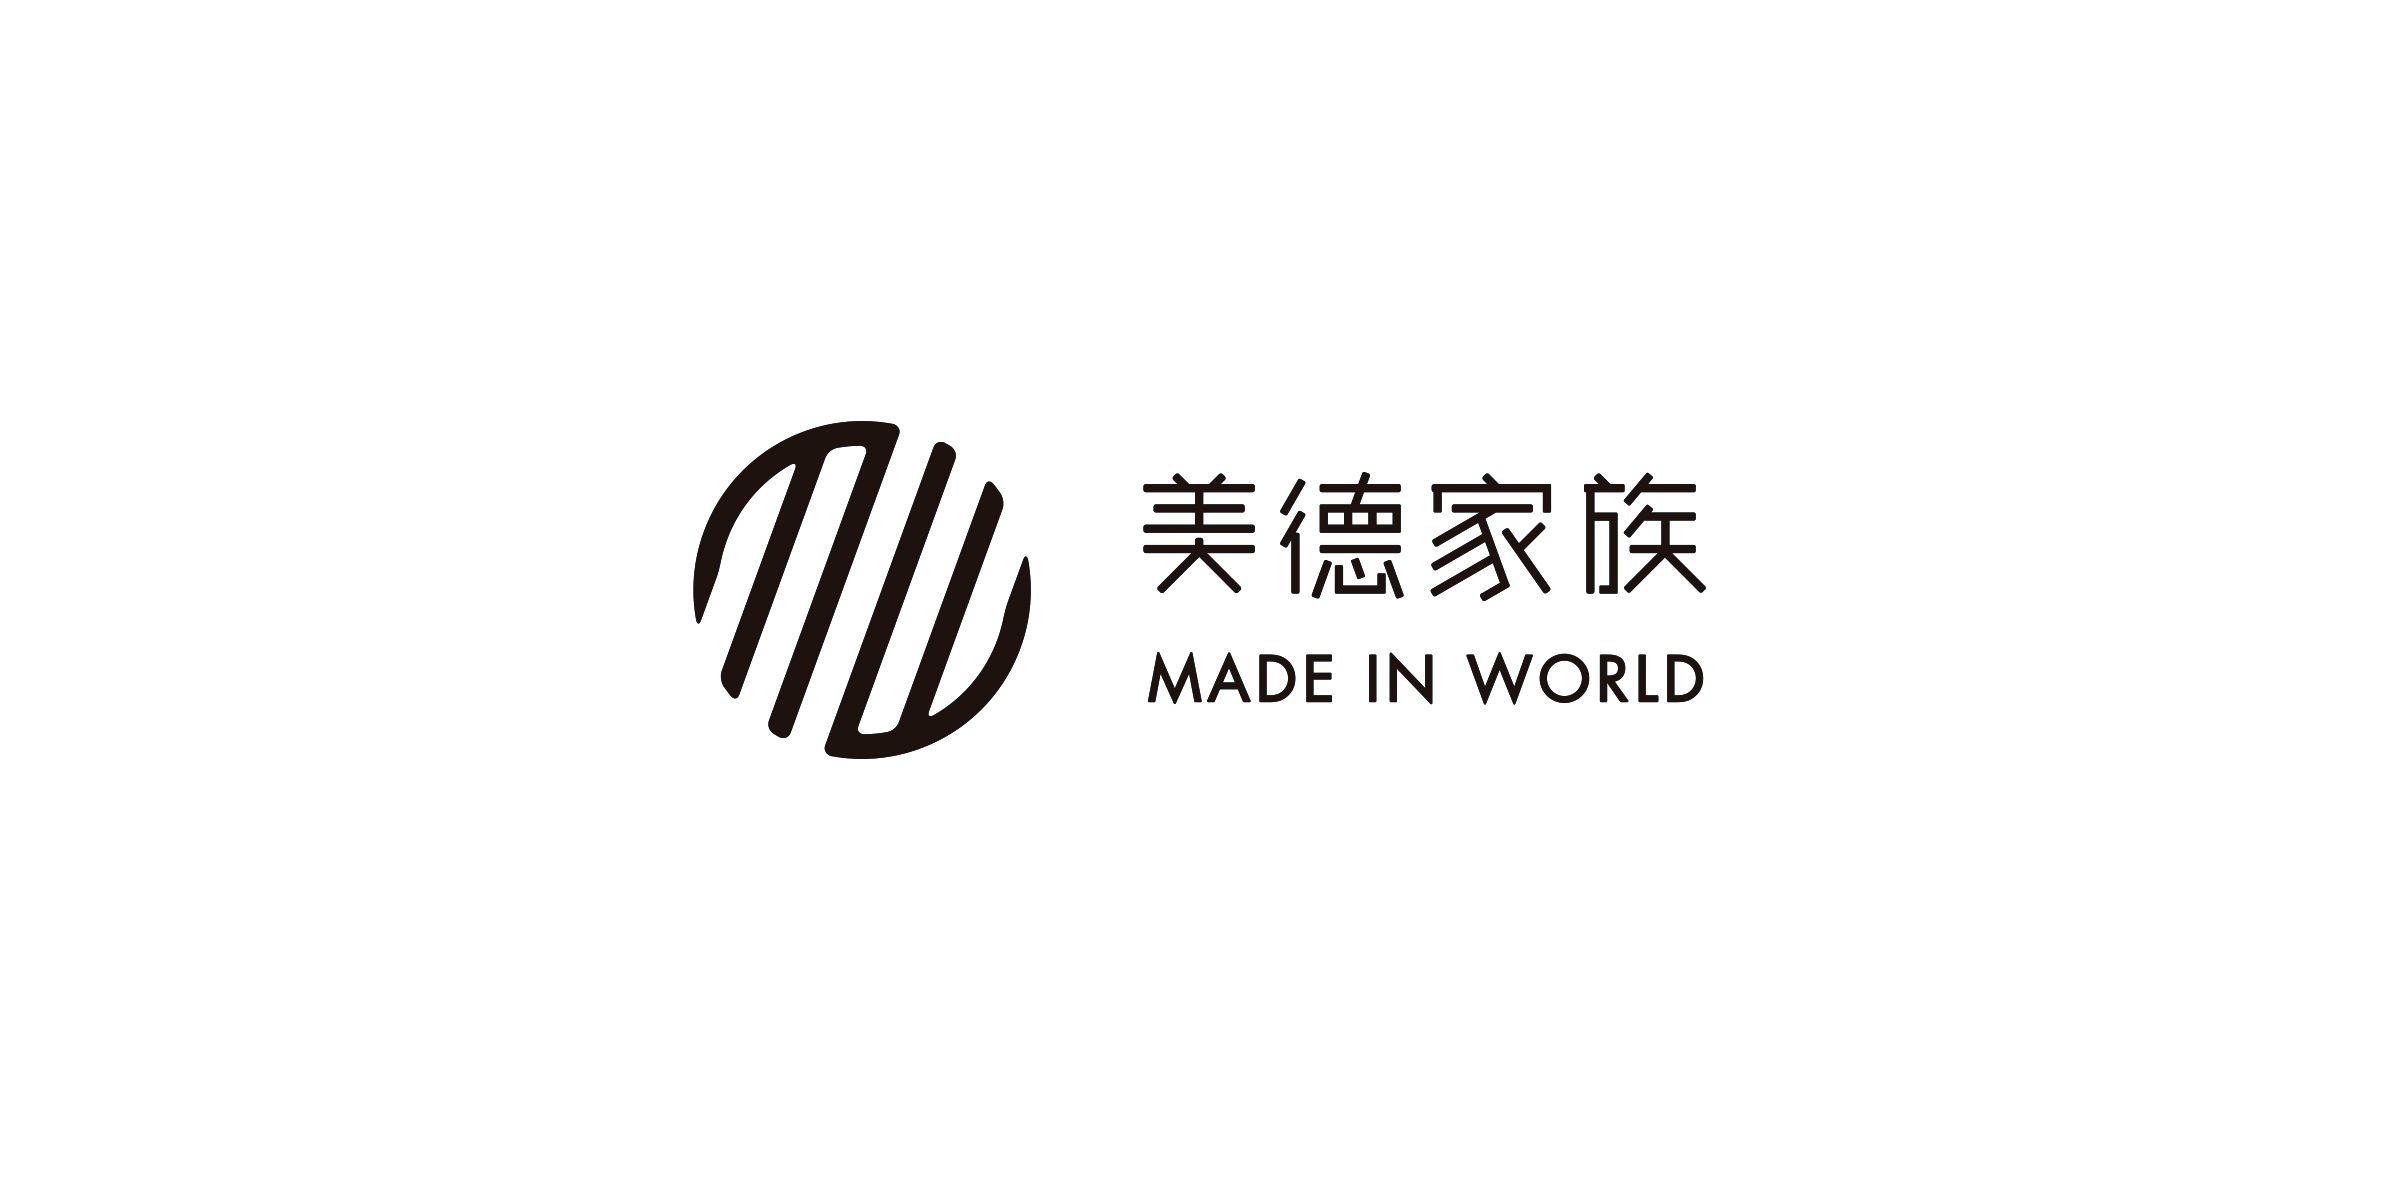 Made in World